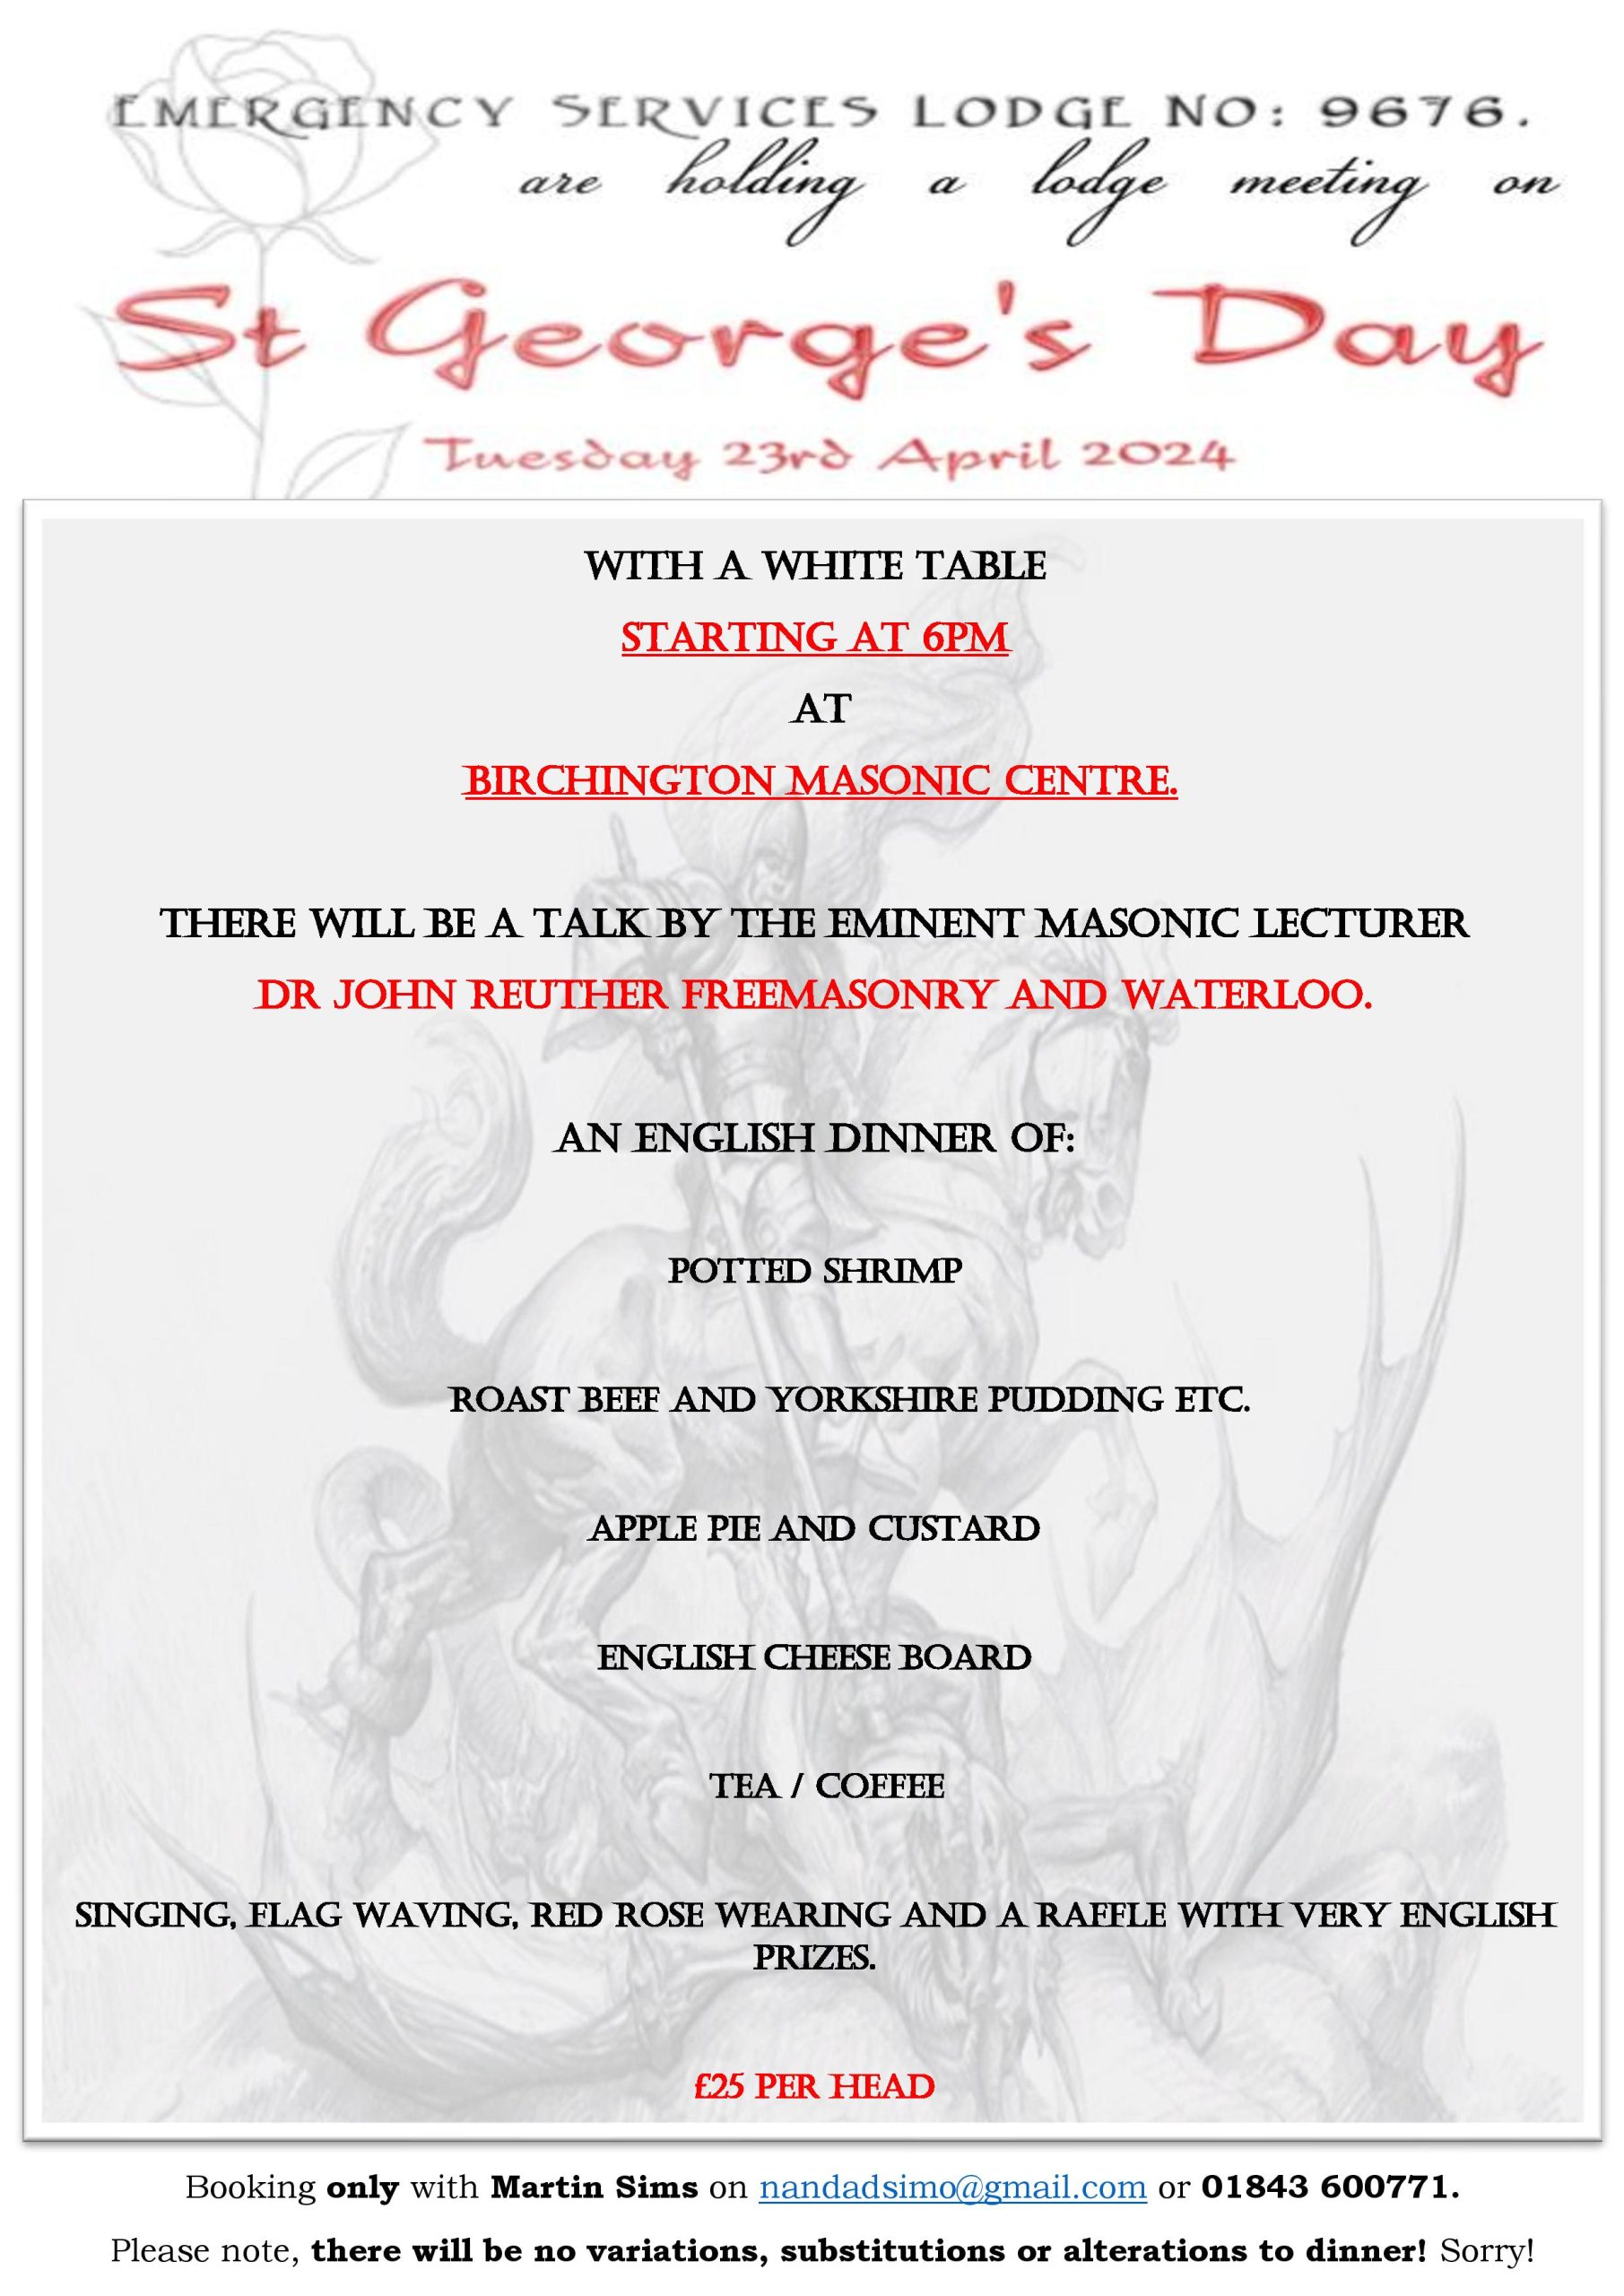 St Georges Day Talk and White Table Event